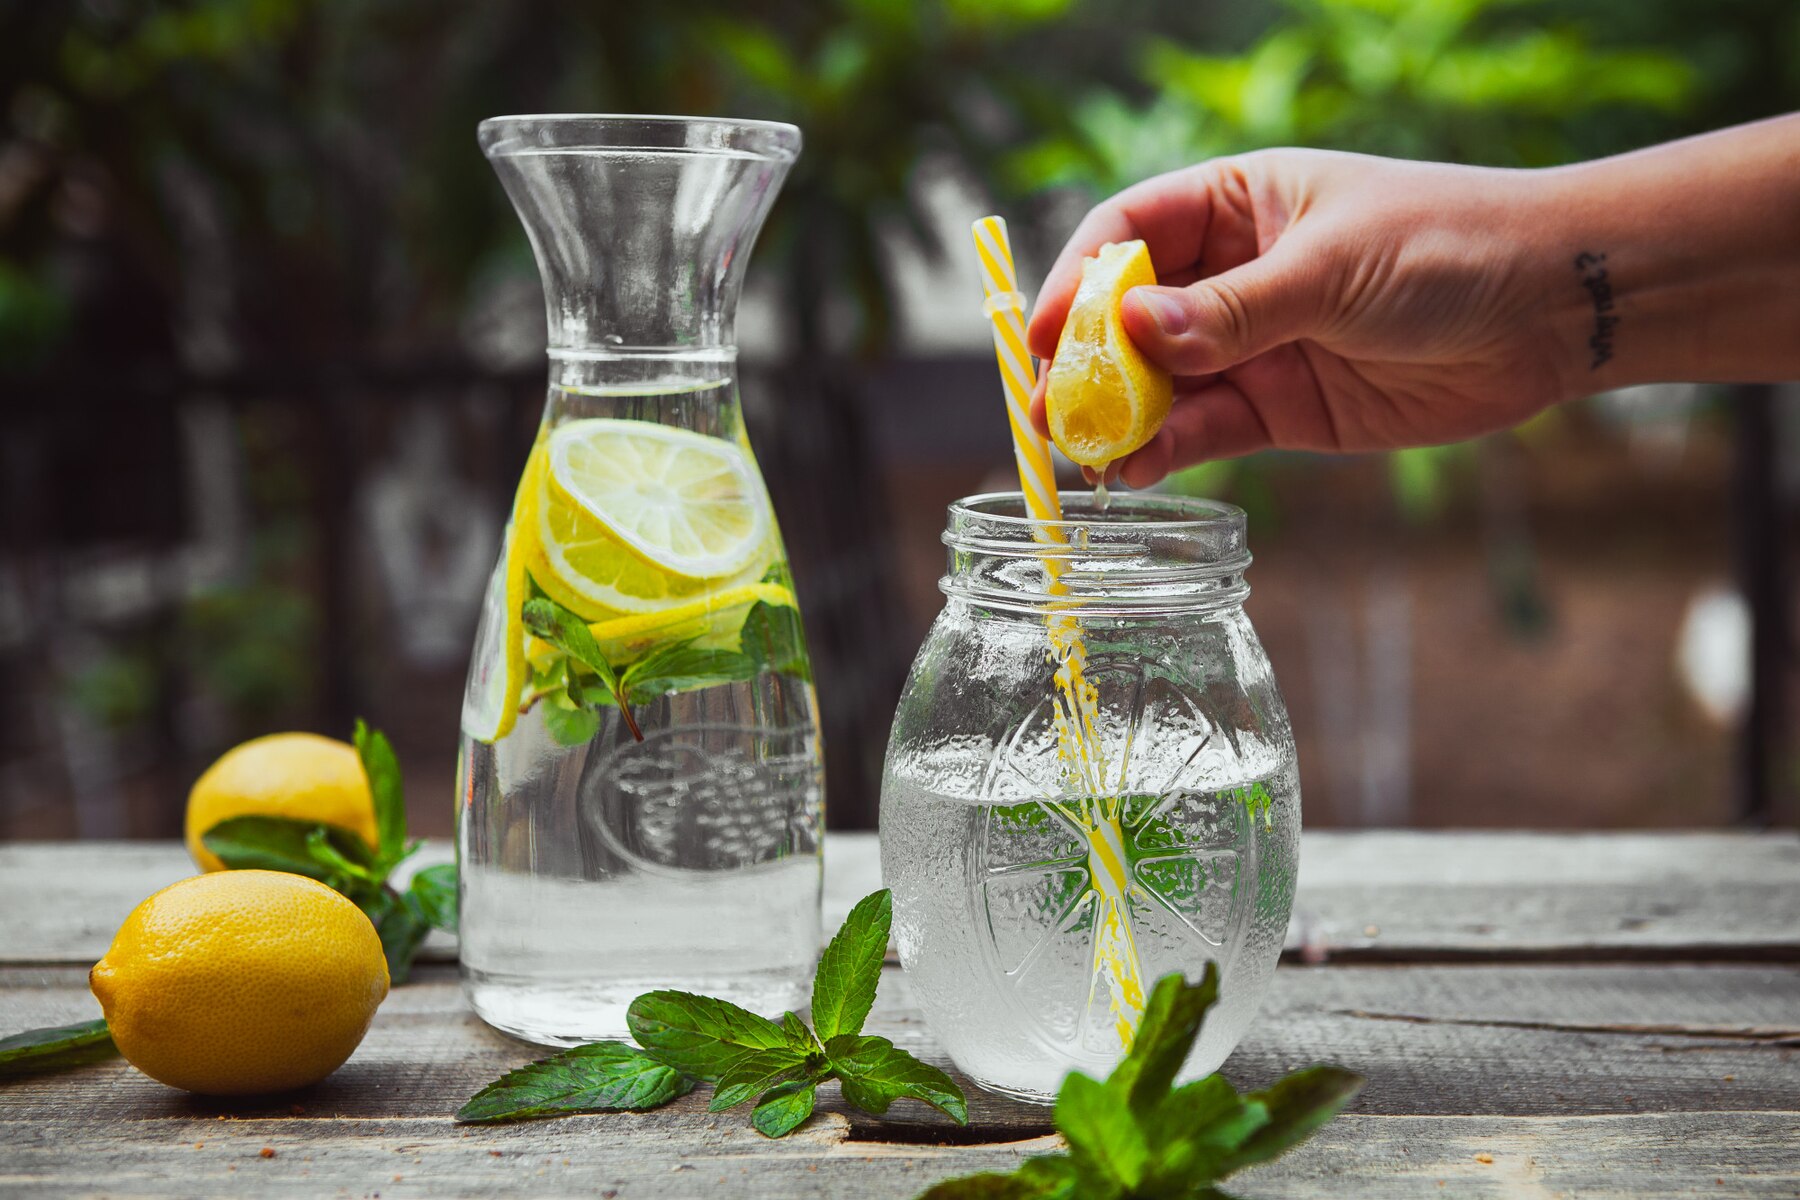 hand-squeezing-lemon-into-a-glass-jar-with-water-side-view-on-wooden-and-yard-table_176474-5965.jpg